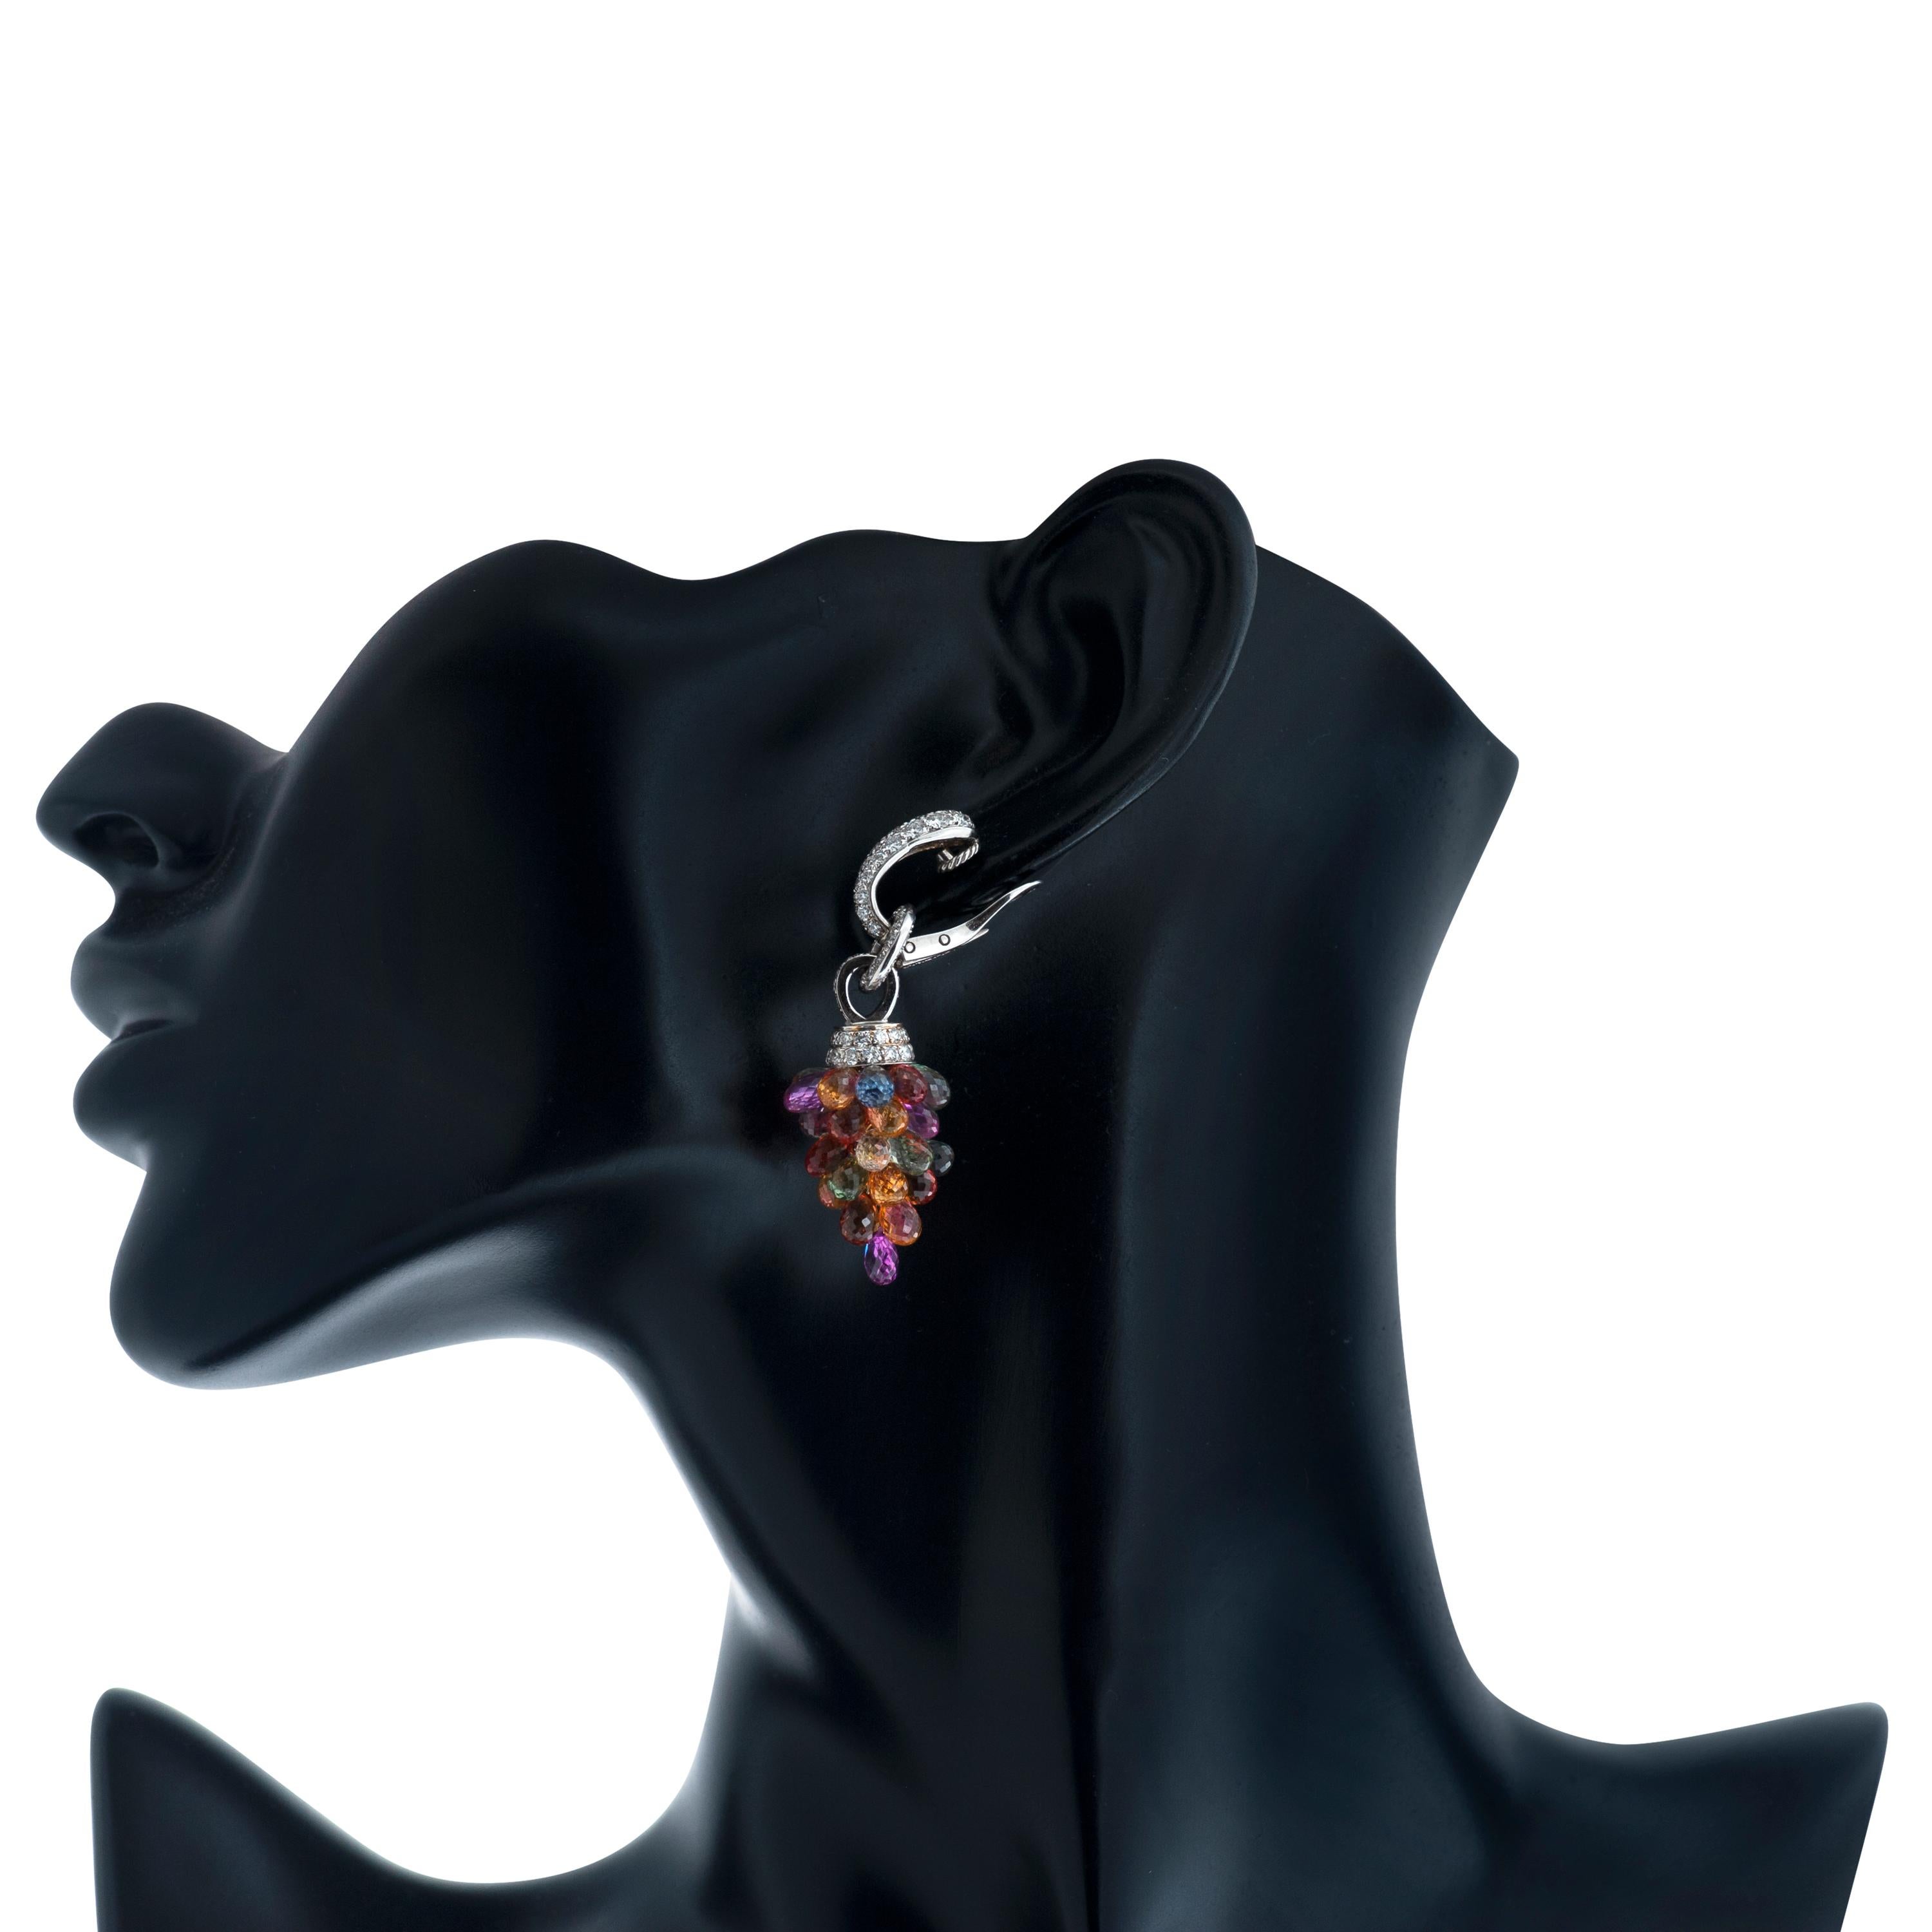 This pair of Graff dangle earrings features briolette sapphires in multiple hues of blue, green, yellow, orange, pink and purple.  As well as approximately 3.20 carats of round brilliant cut diamonds F-G color and VS clarity. 

Approximately 2